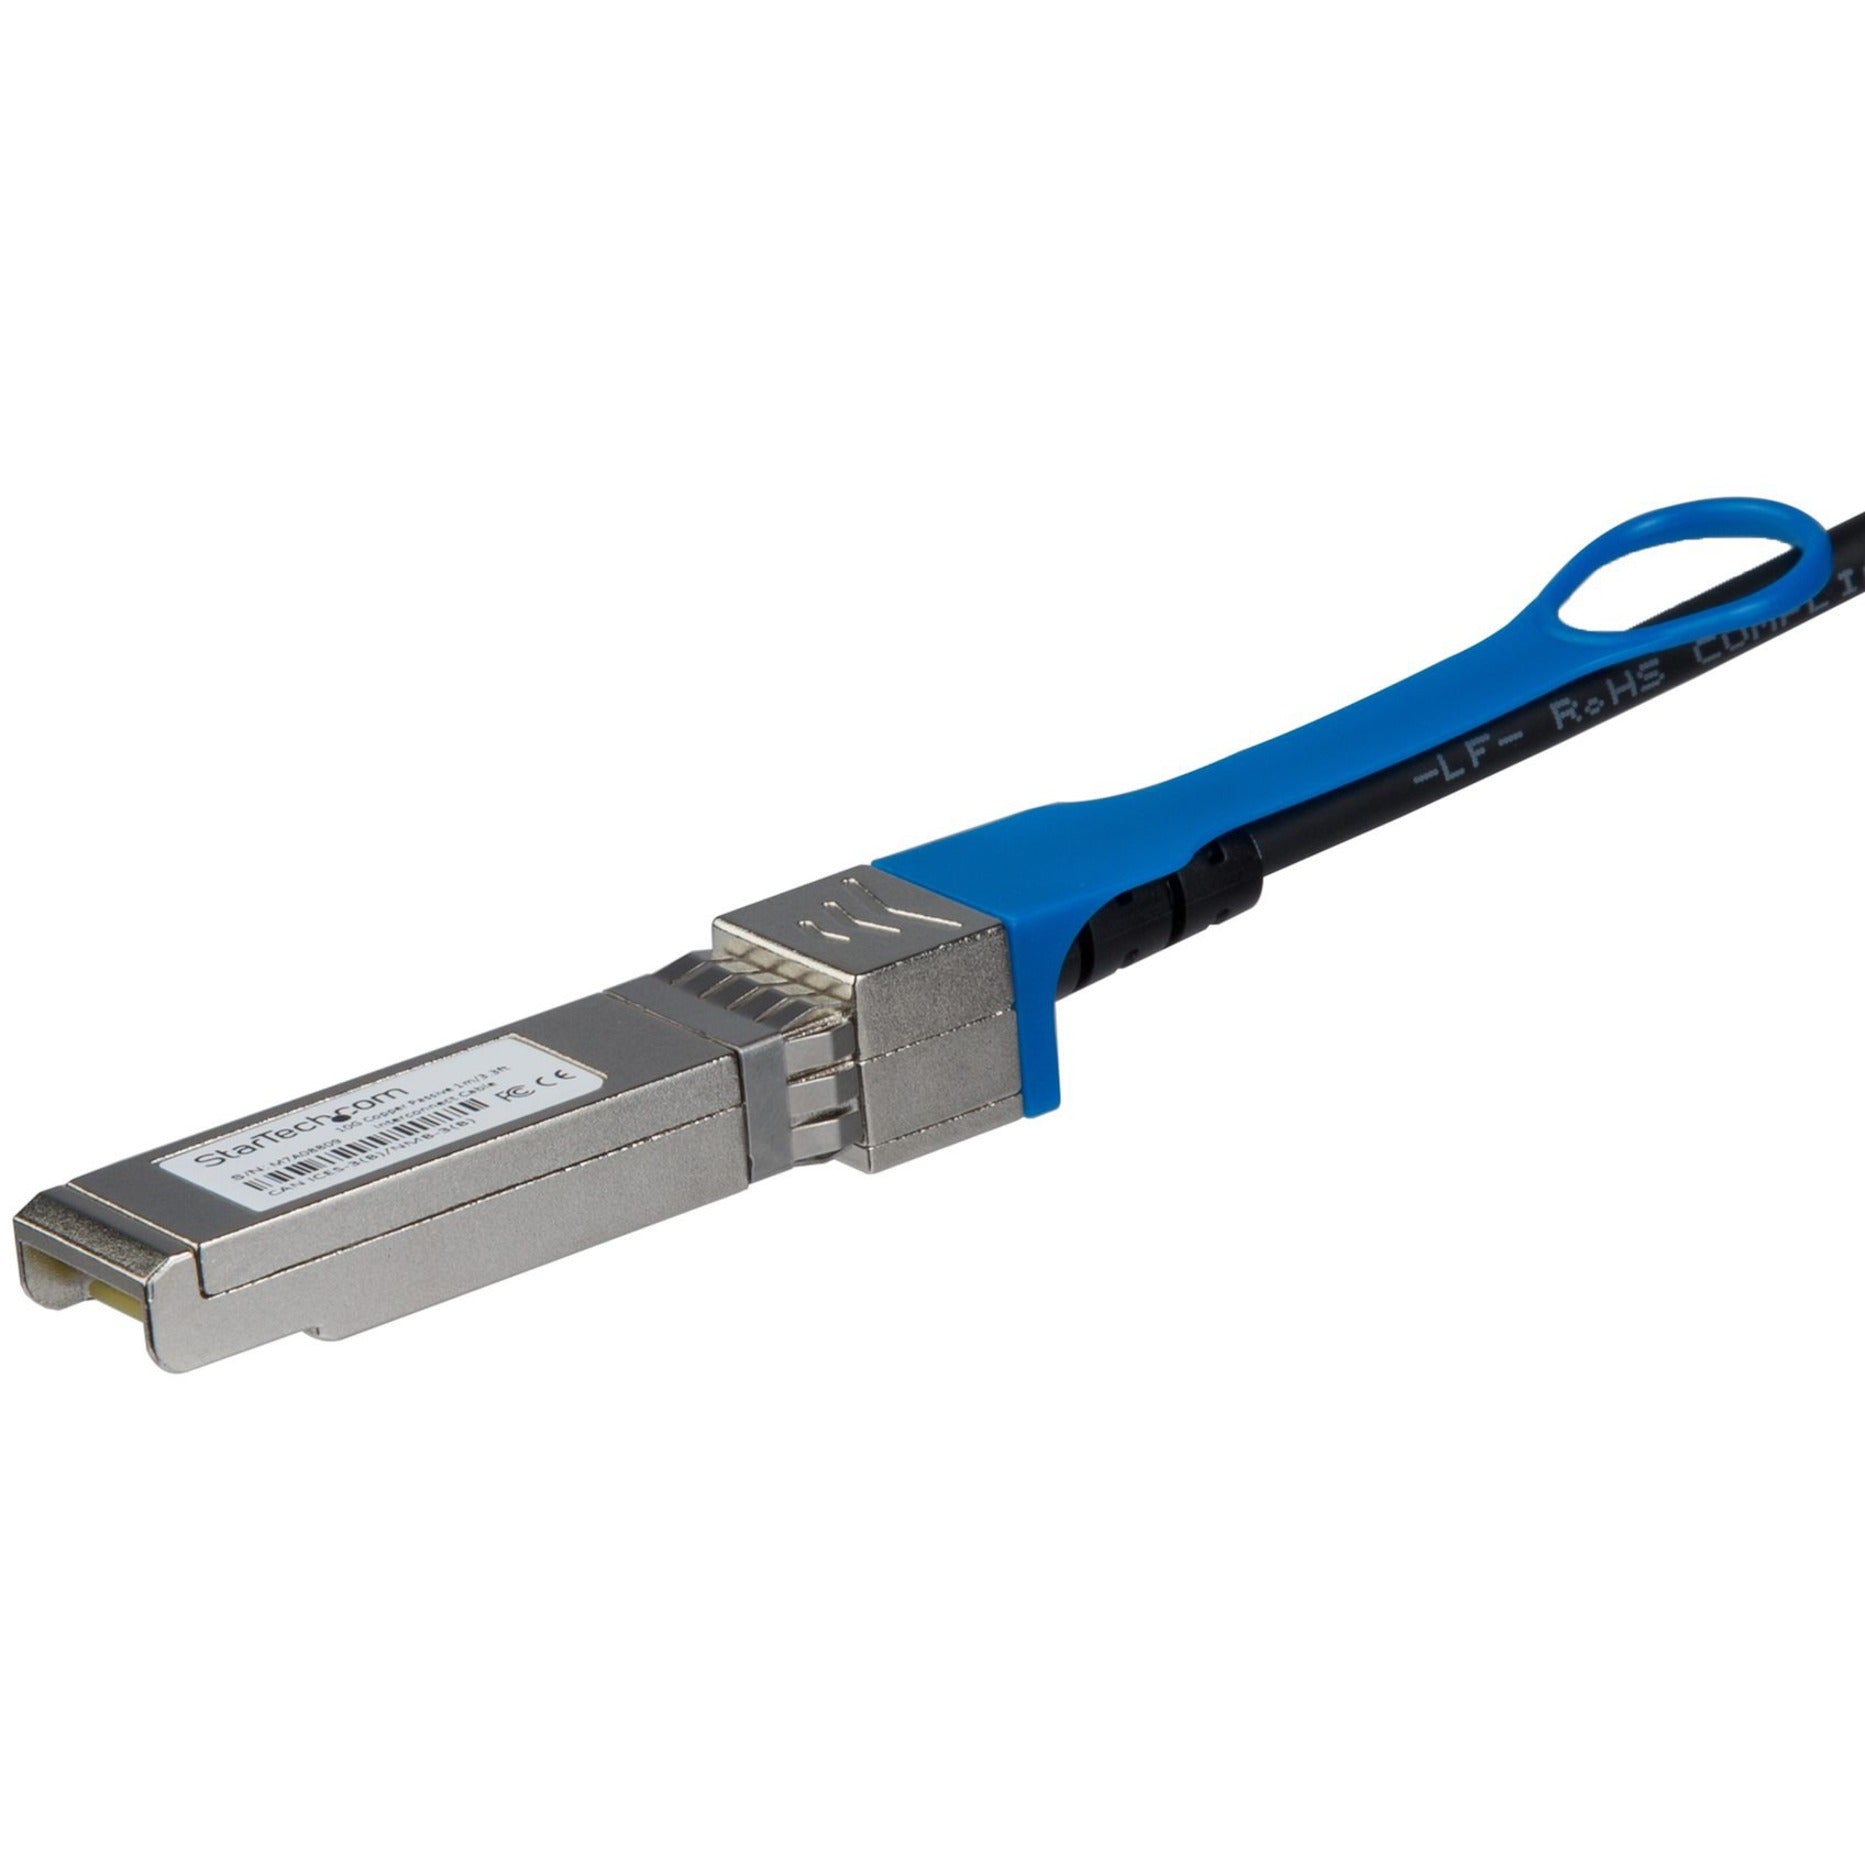 StarTech.com SFP10GAC7M SFP+ Direct Attach Cable - MSA Compliant - 7 m (23 ft.), Active, Hot-swappable, 10 Gbit/s